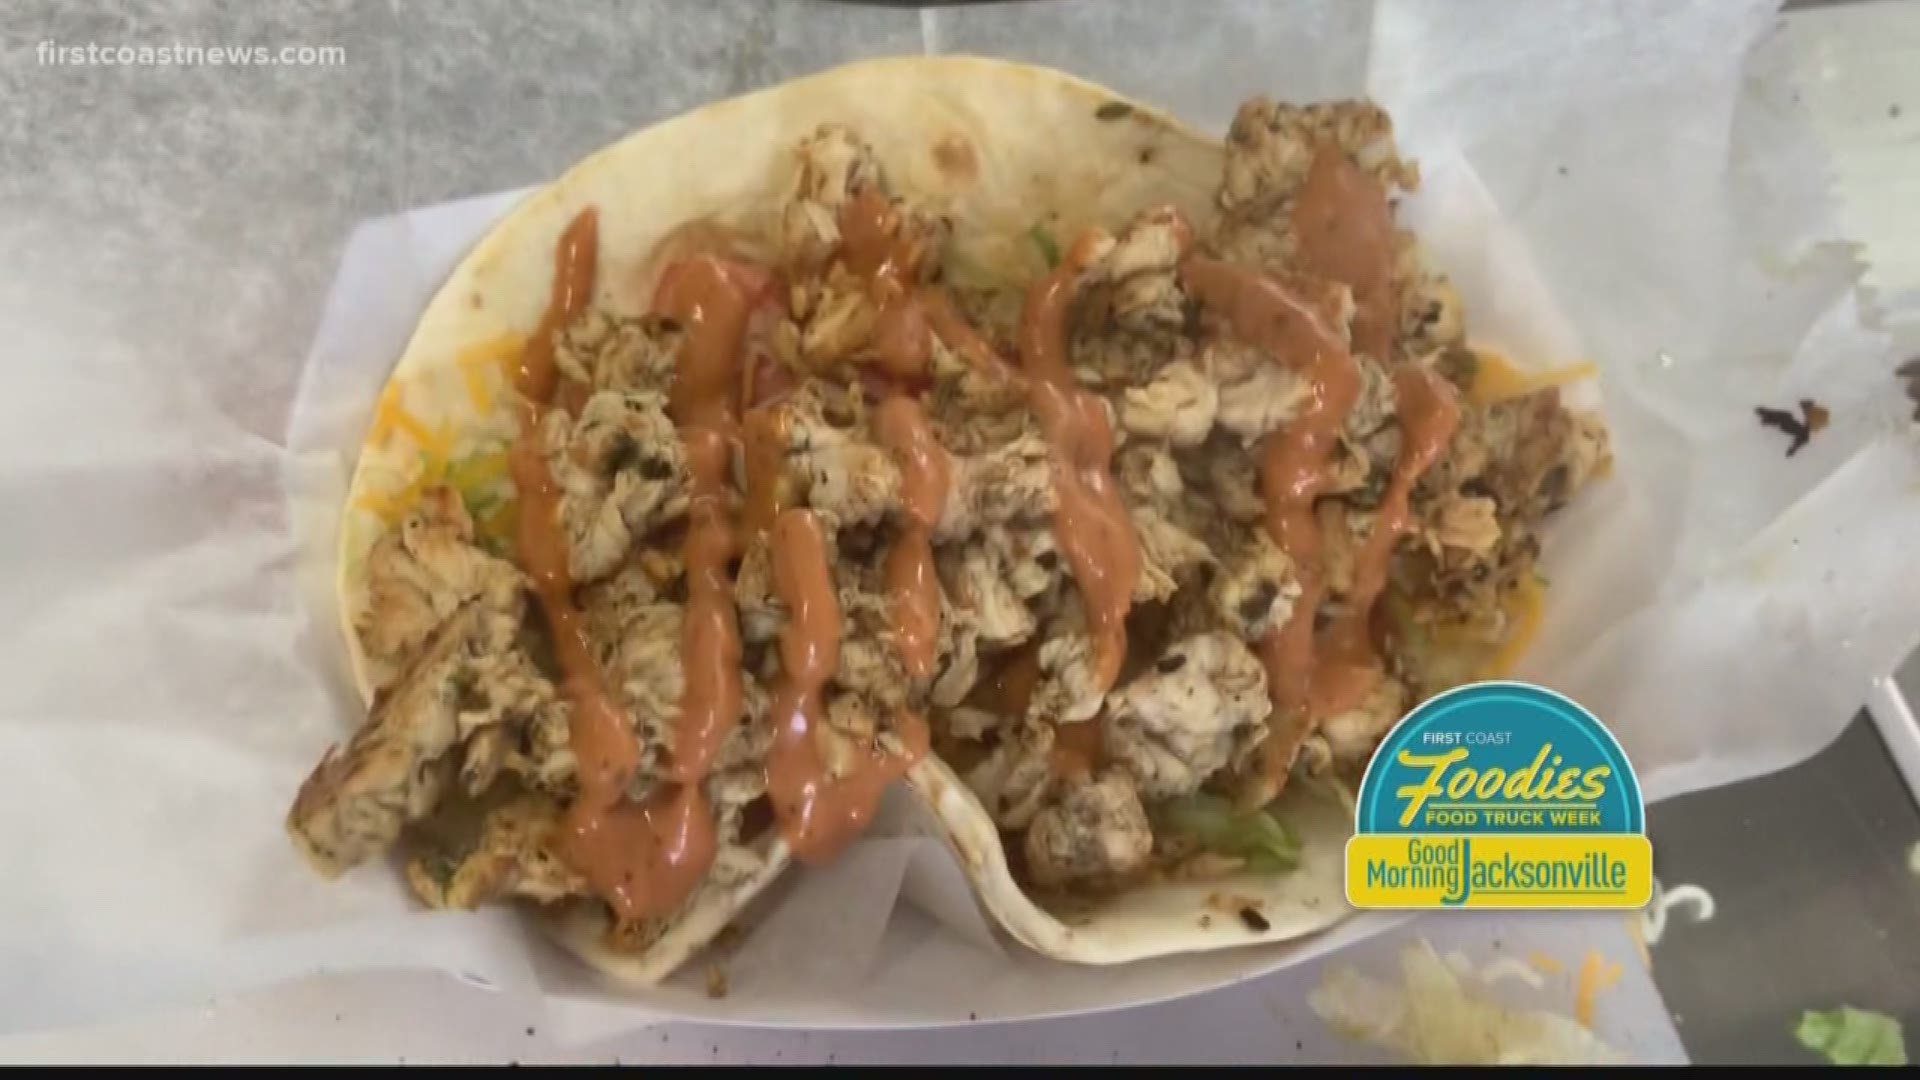 Their tequila-lime chicken is out of this world! Watch as Kamrel checks out local Food Trucks in our area all this week.